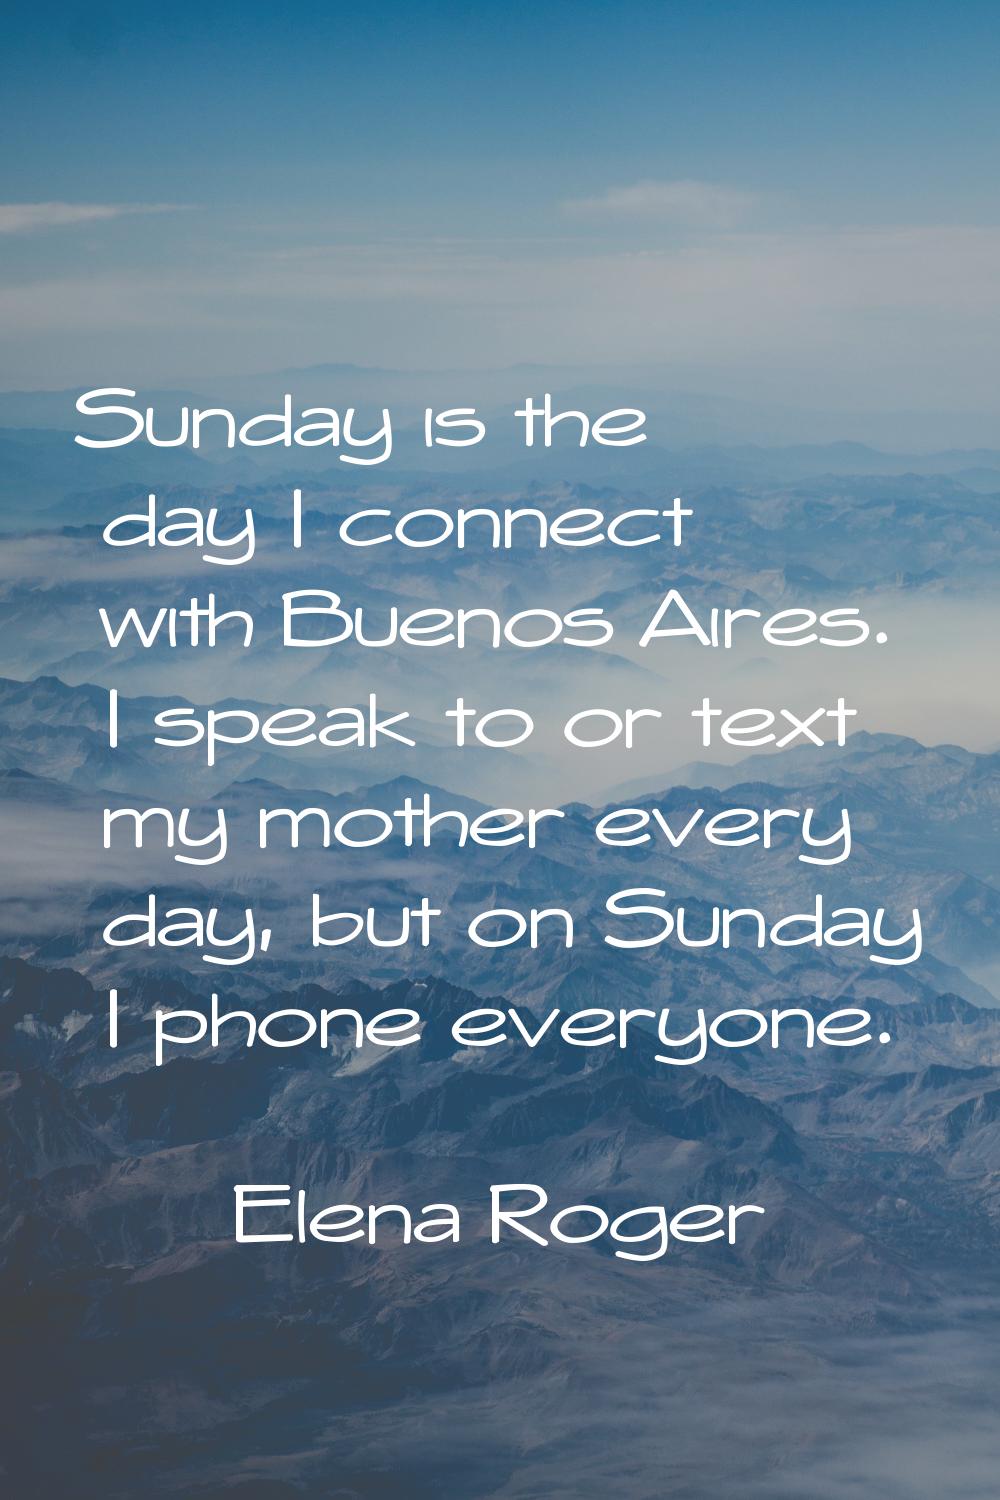 Sunday is the day I connect with Buenos Aires. I speak to or text my mother every day, but on Sunda